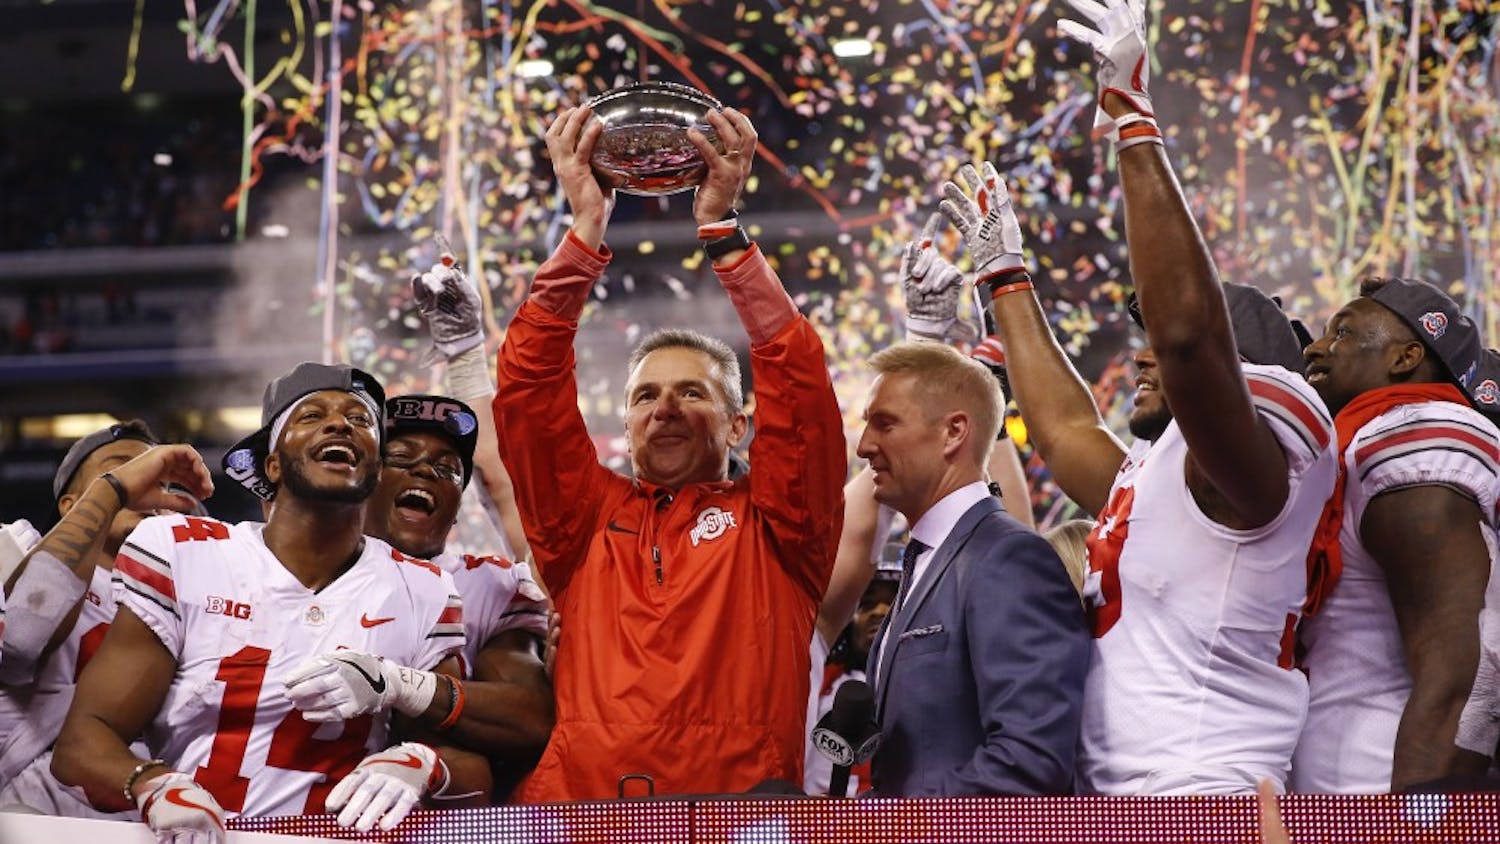 Ohio State Buckeyes head coach Urban Meyer celebrates with his team after their 27-21 Big Ten Championship win over the Wisconsin Badgers in 2017.